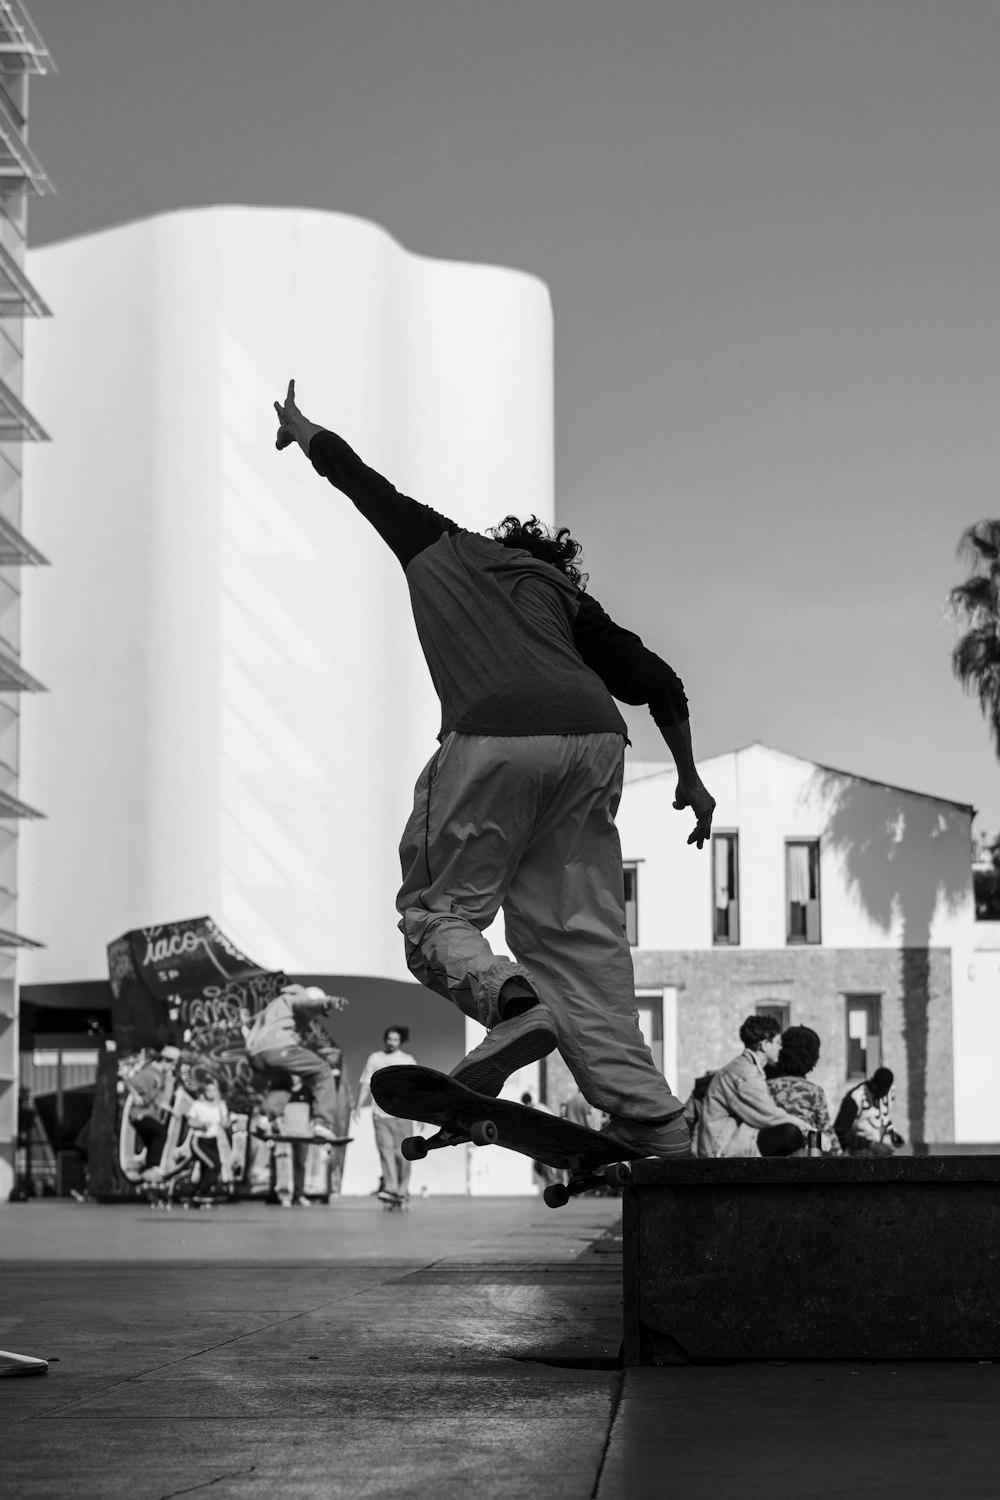 grayscale photography of person skateboarding on ramp